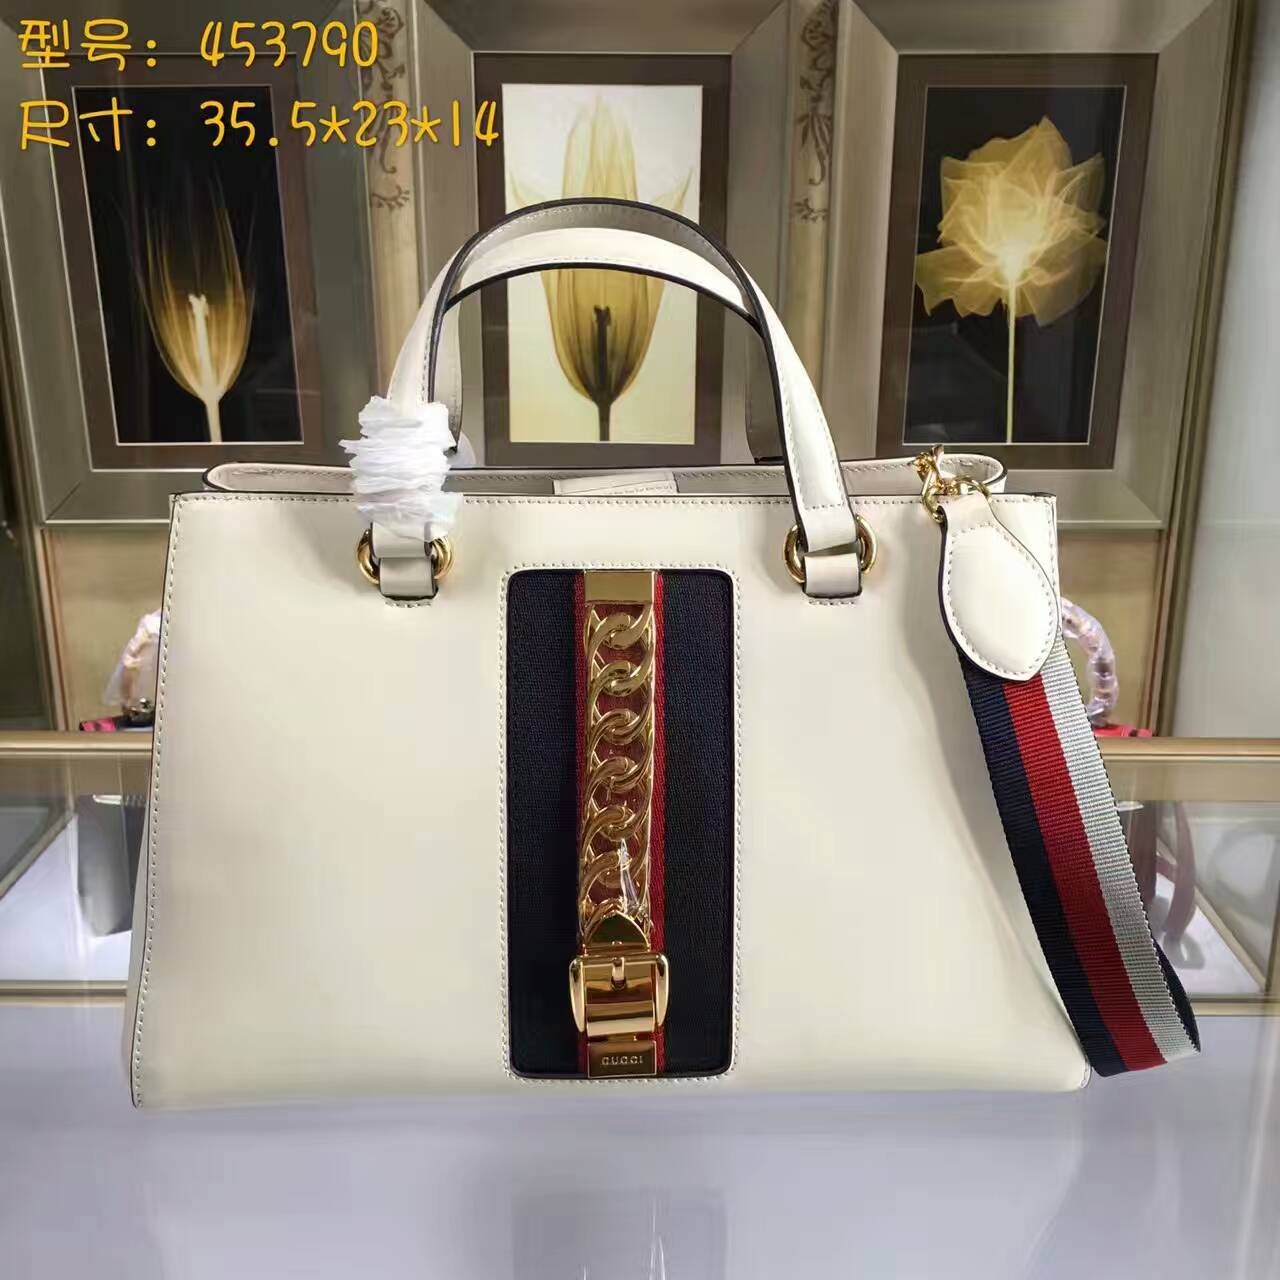 Gucci Sylvie leather top handle bag-453790